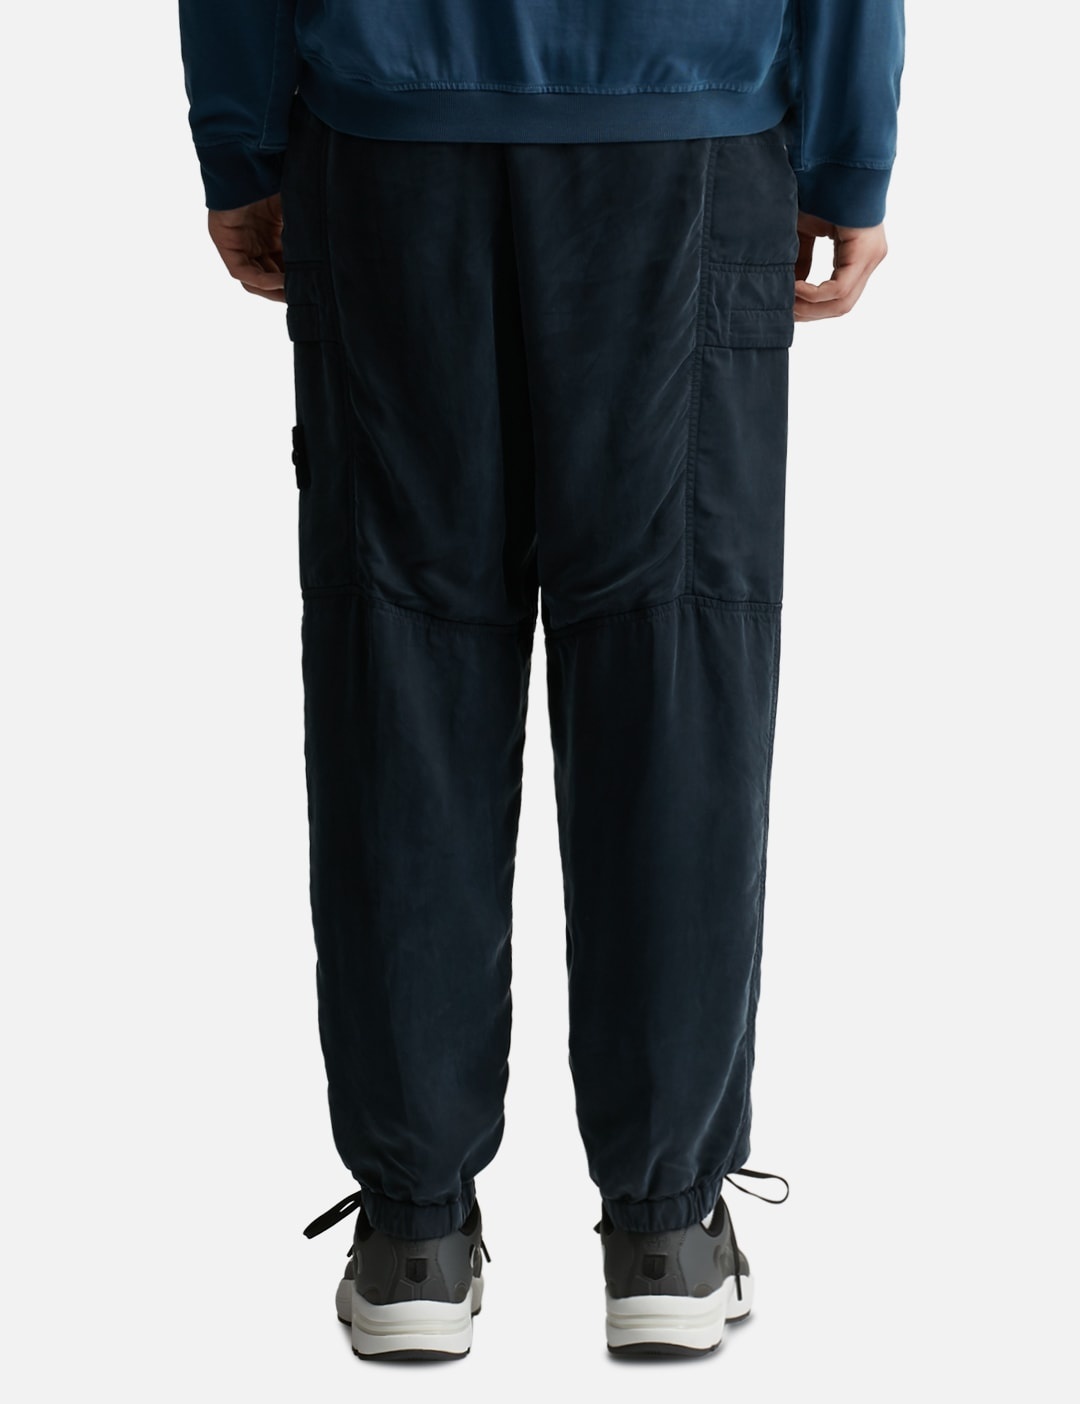 GHOST PIECE LOOSE FIT CARGO PANTS - 4